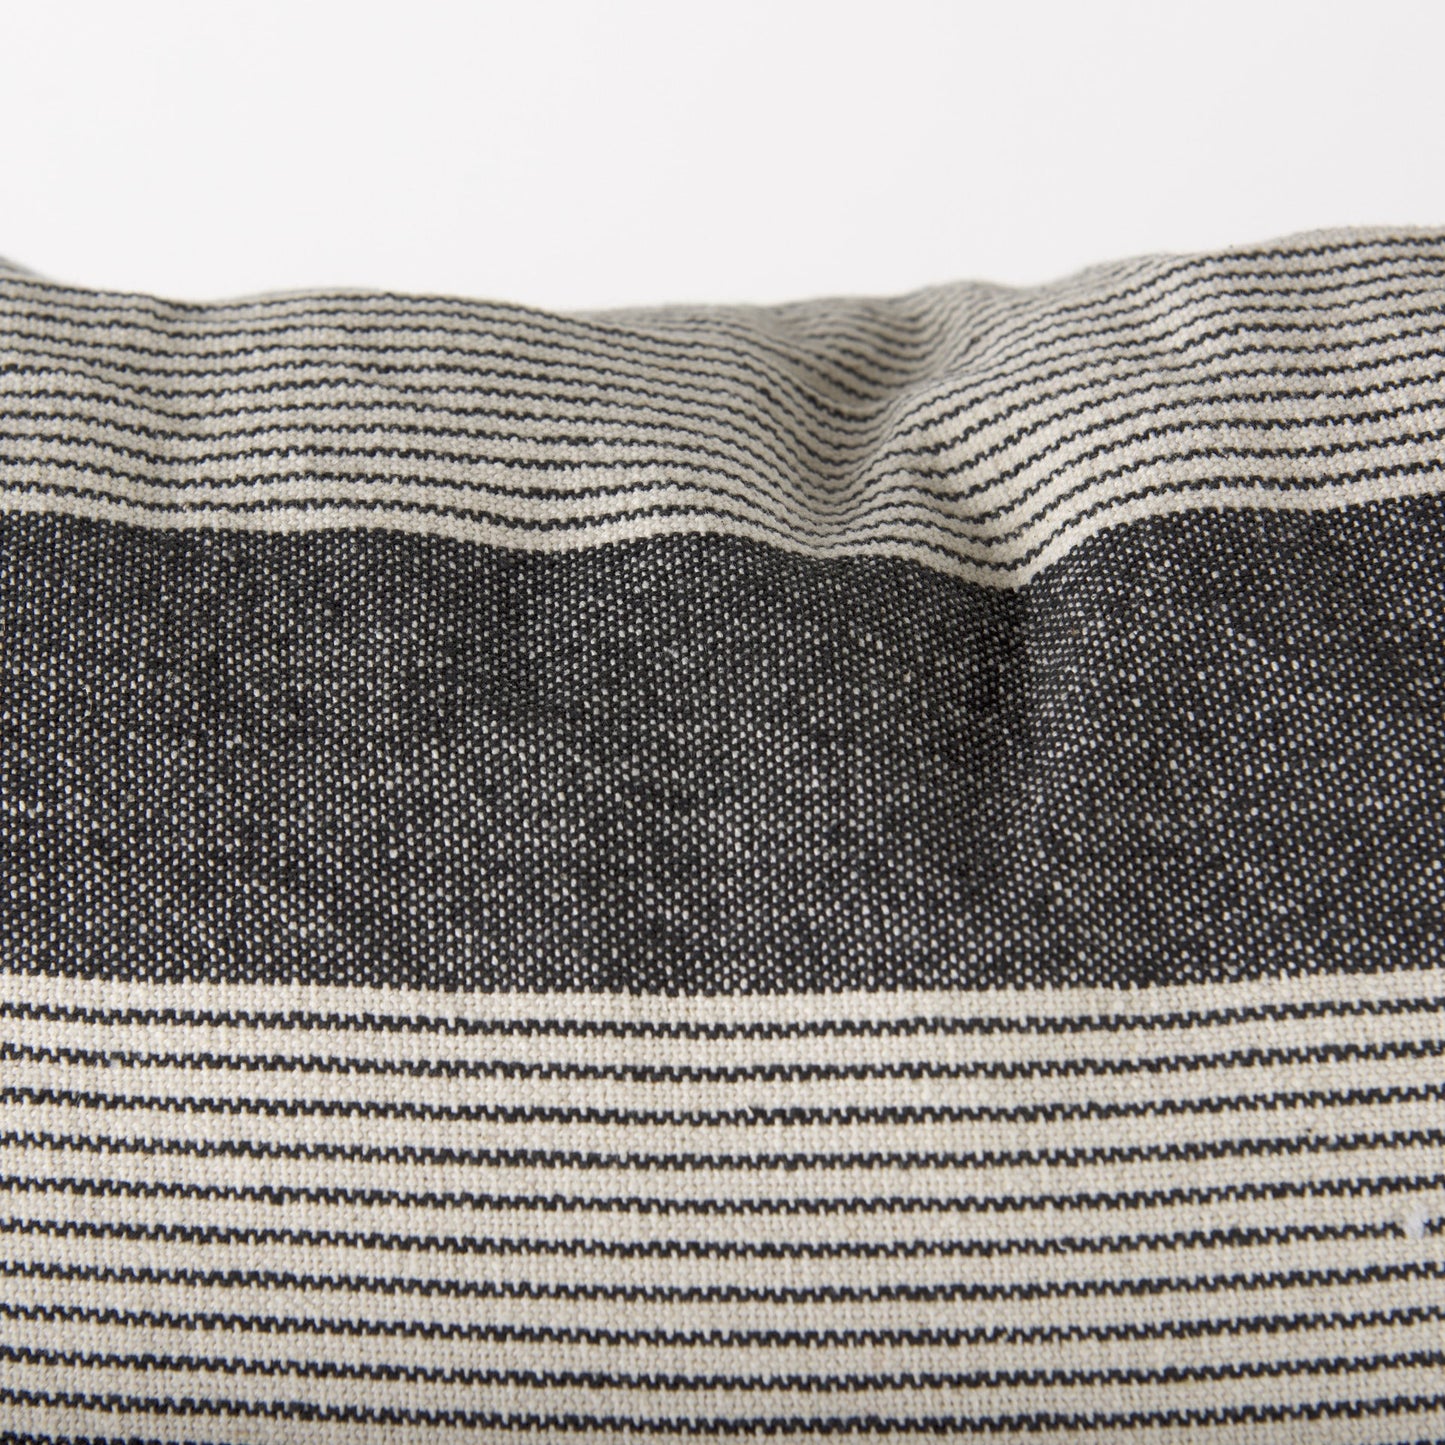 Beige And Gray Striped Throw Pillow Cover